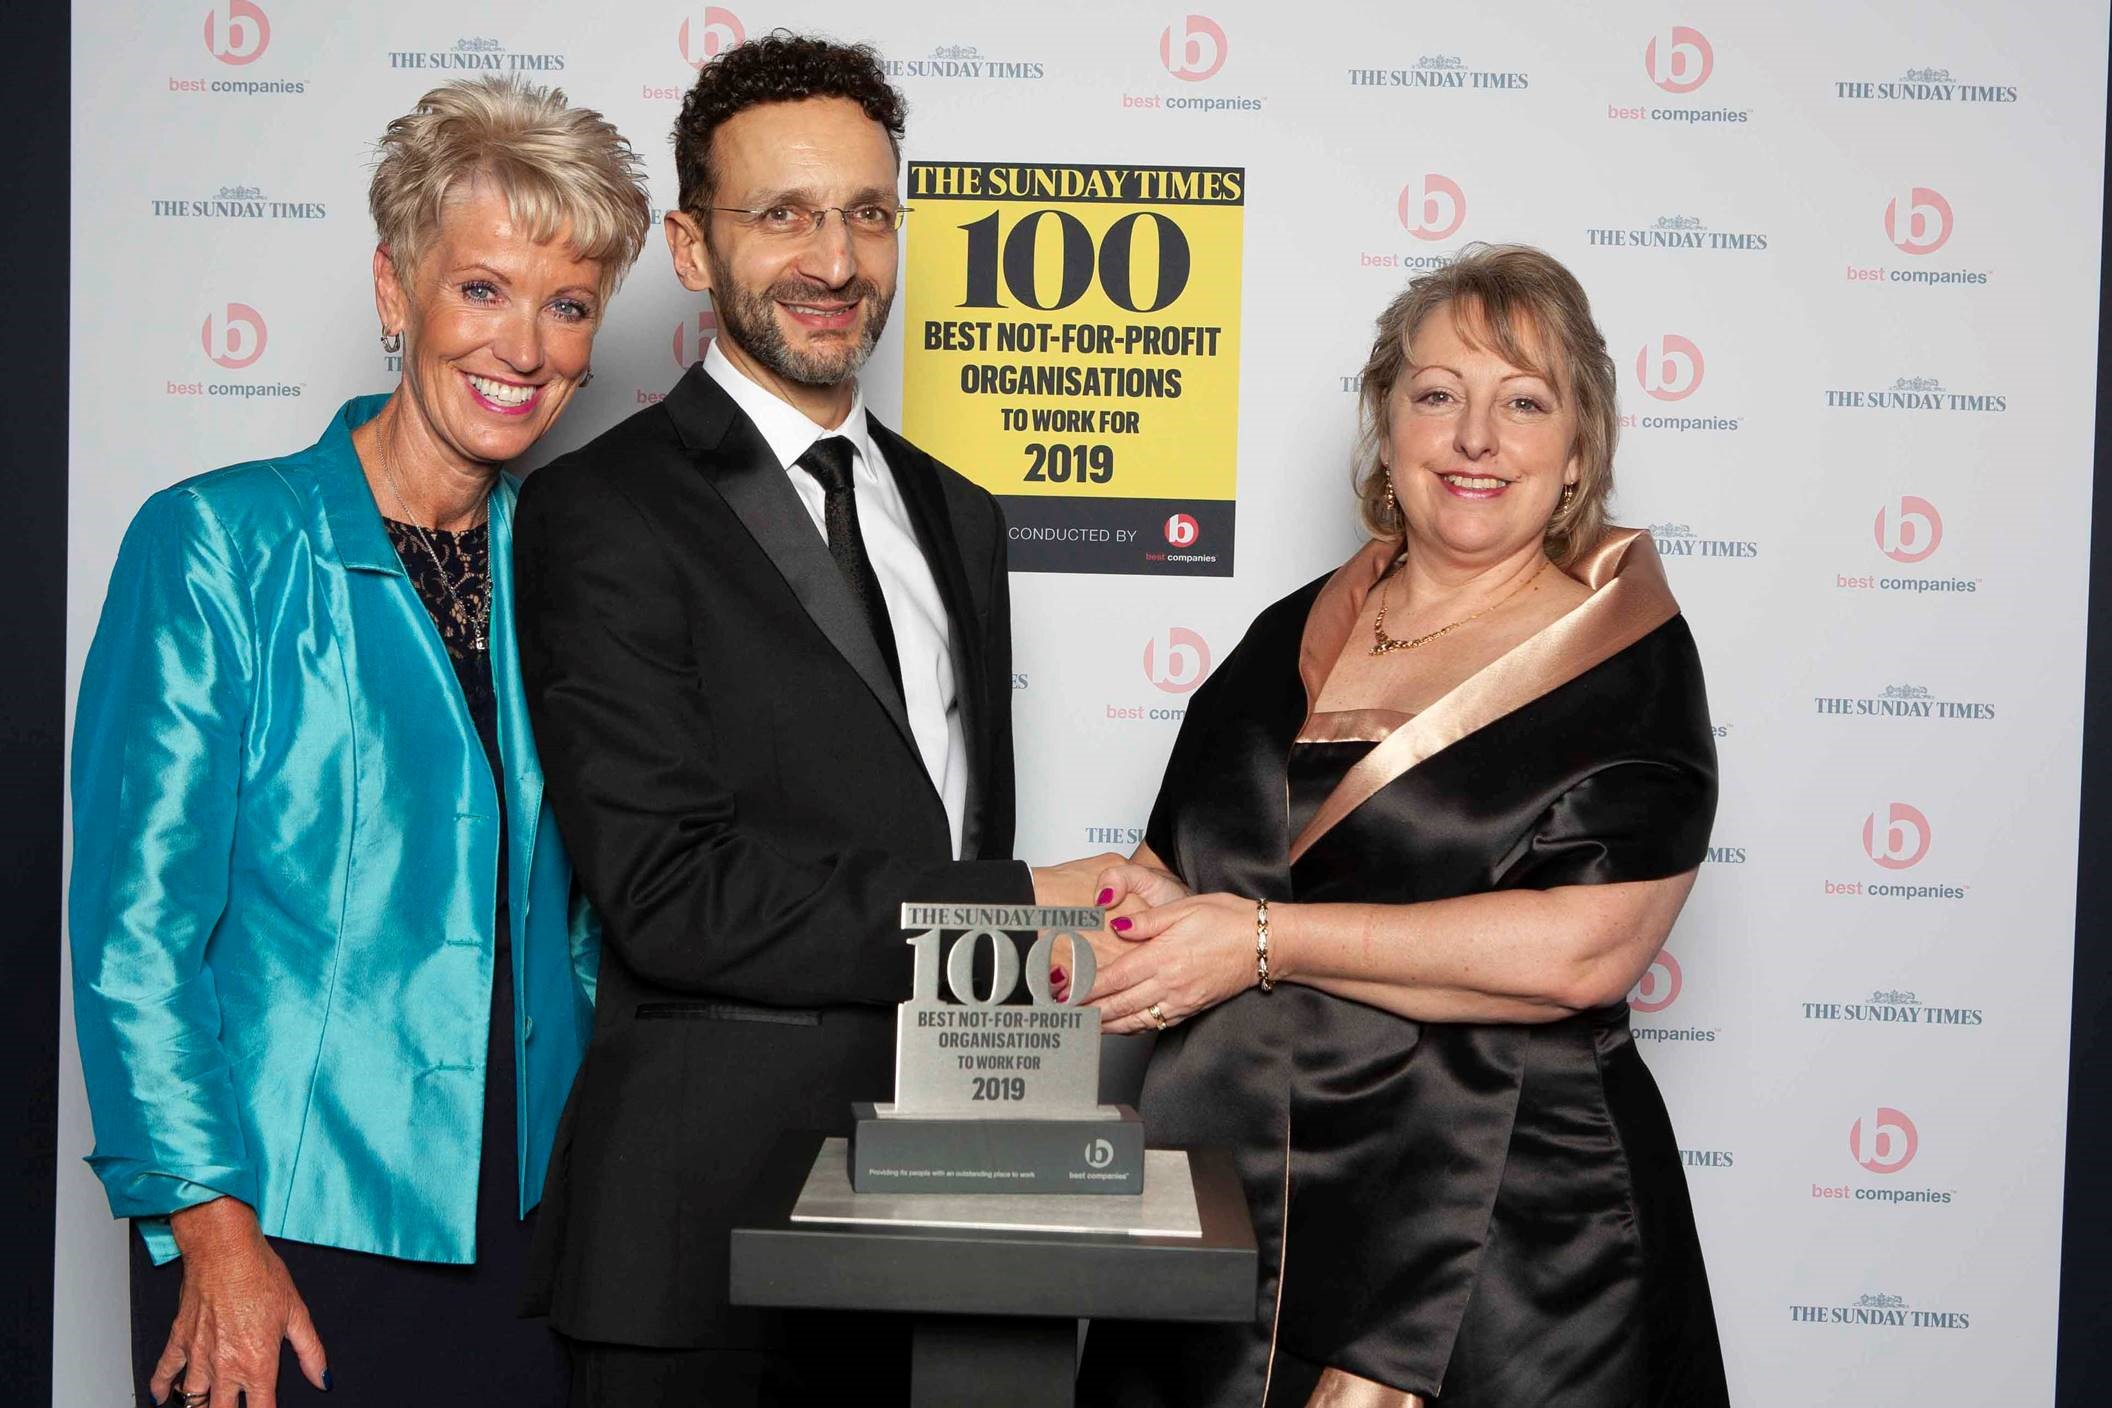 Liz accepting award from the Sunday Times 2019 